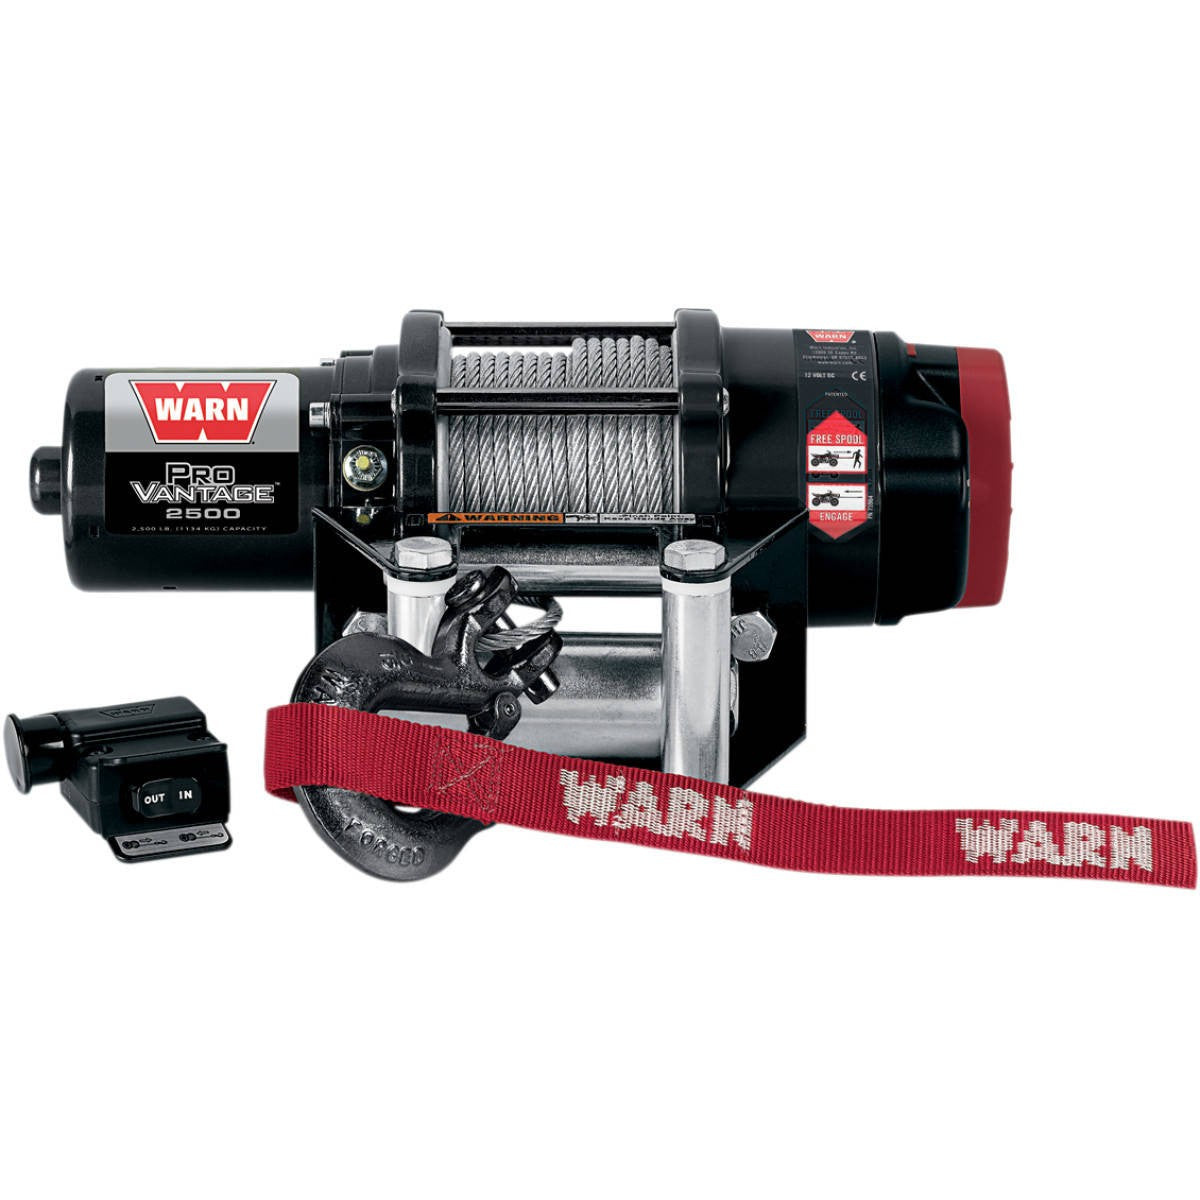 Warn Provantage 2500-lb Winch with Wire Rope - PeakBoys